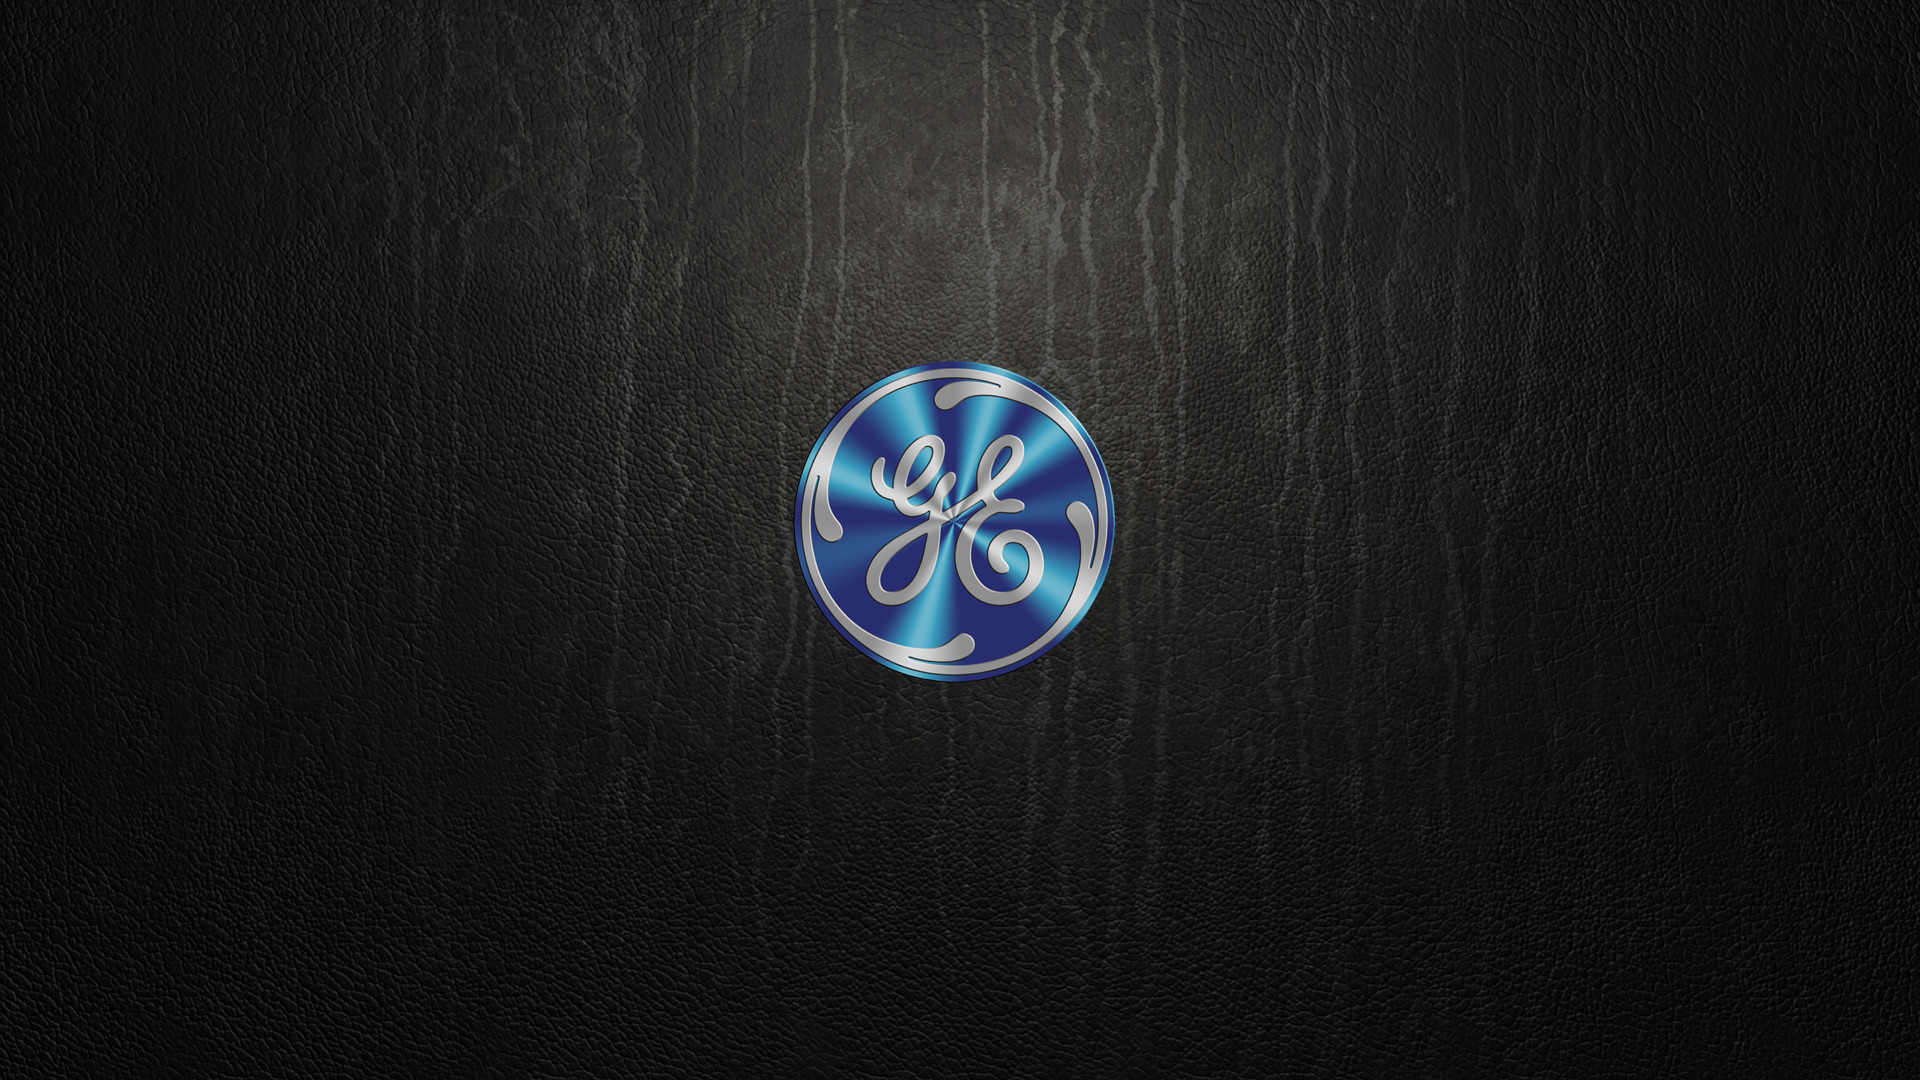 Products General Electric HD Wallpaper | Background Image